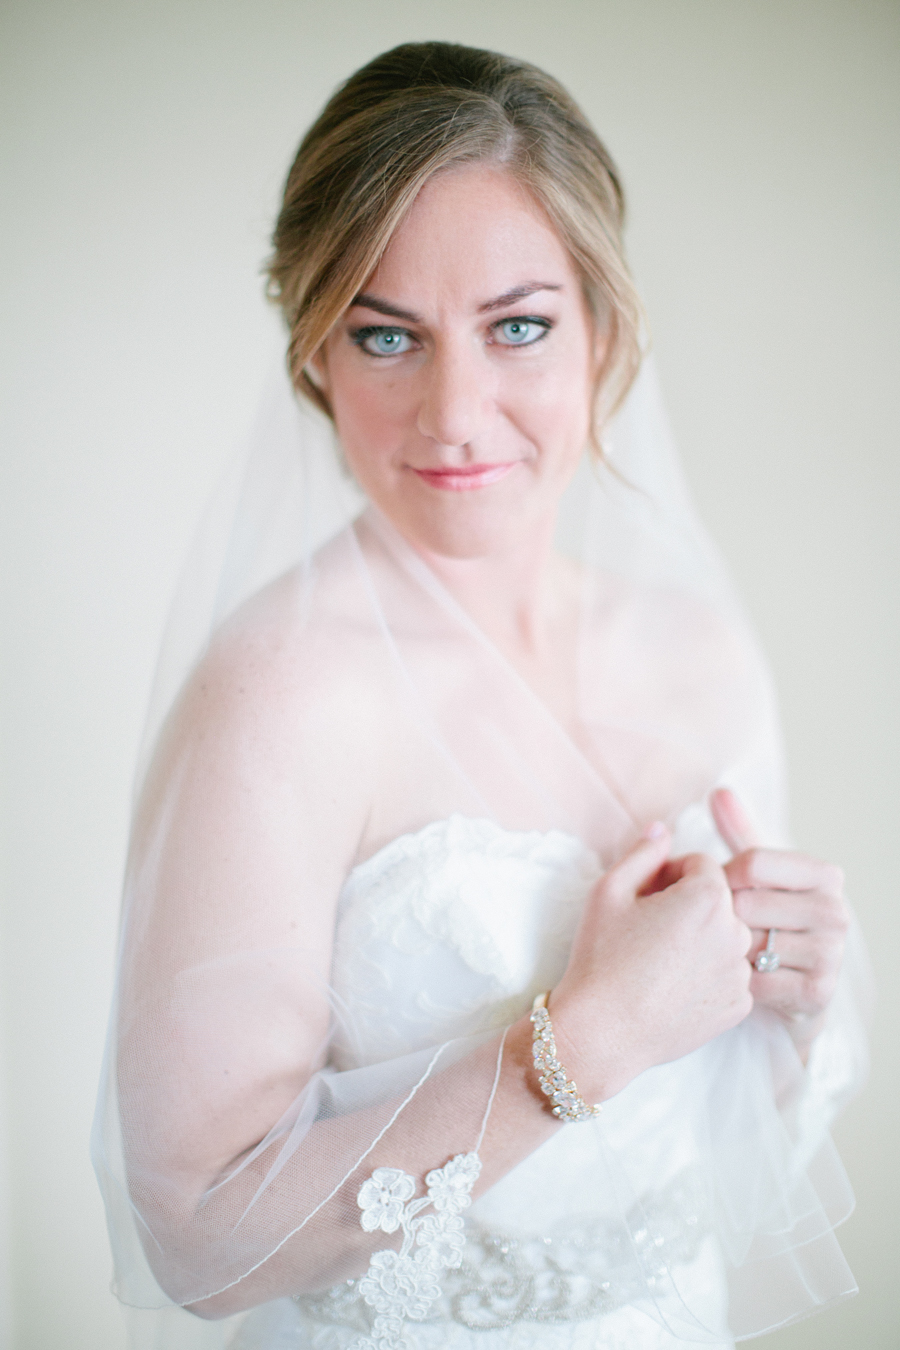 Bride in Lace Trimmed Wedding Veil